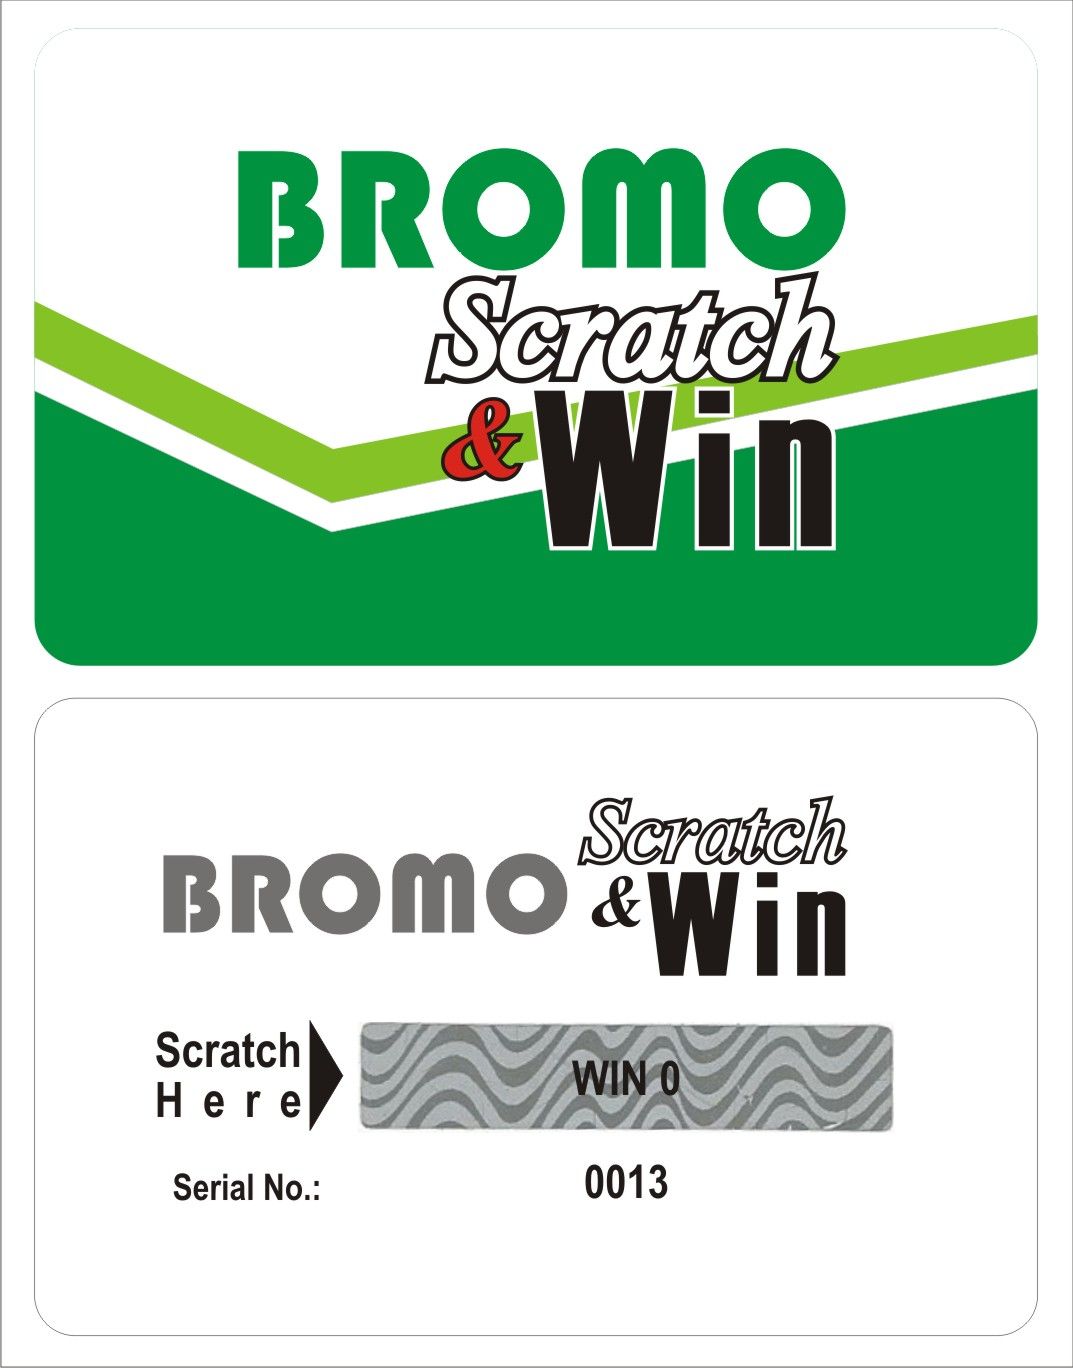 CALL EMMANUEL ON 08176499649 TO PRINT PROMO SCRATCH CARDS, GIFT CARDS IN LAGOS NIGERIA